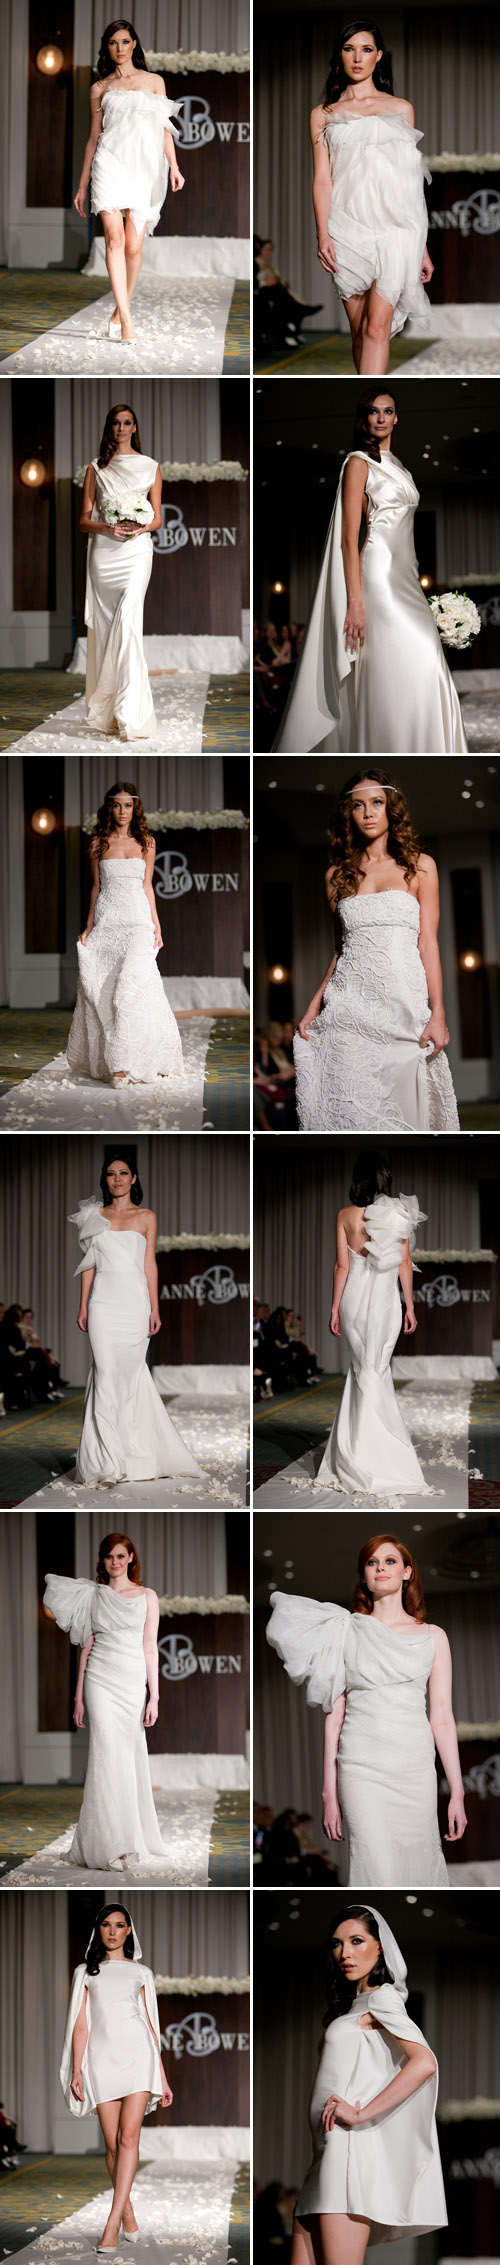 Anne Bowen Spring 2011 wedding dress colleciton from NY Bridal Market, photos by John and Joseph Photography